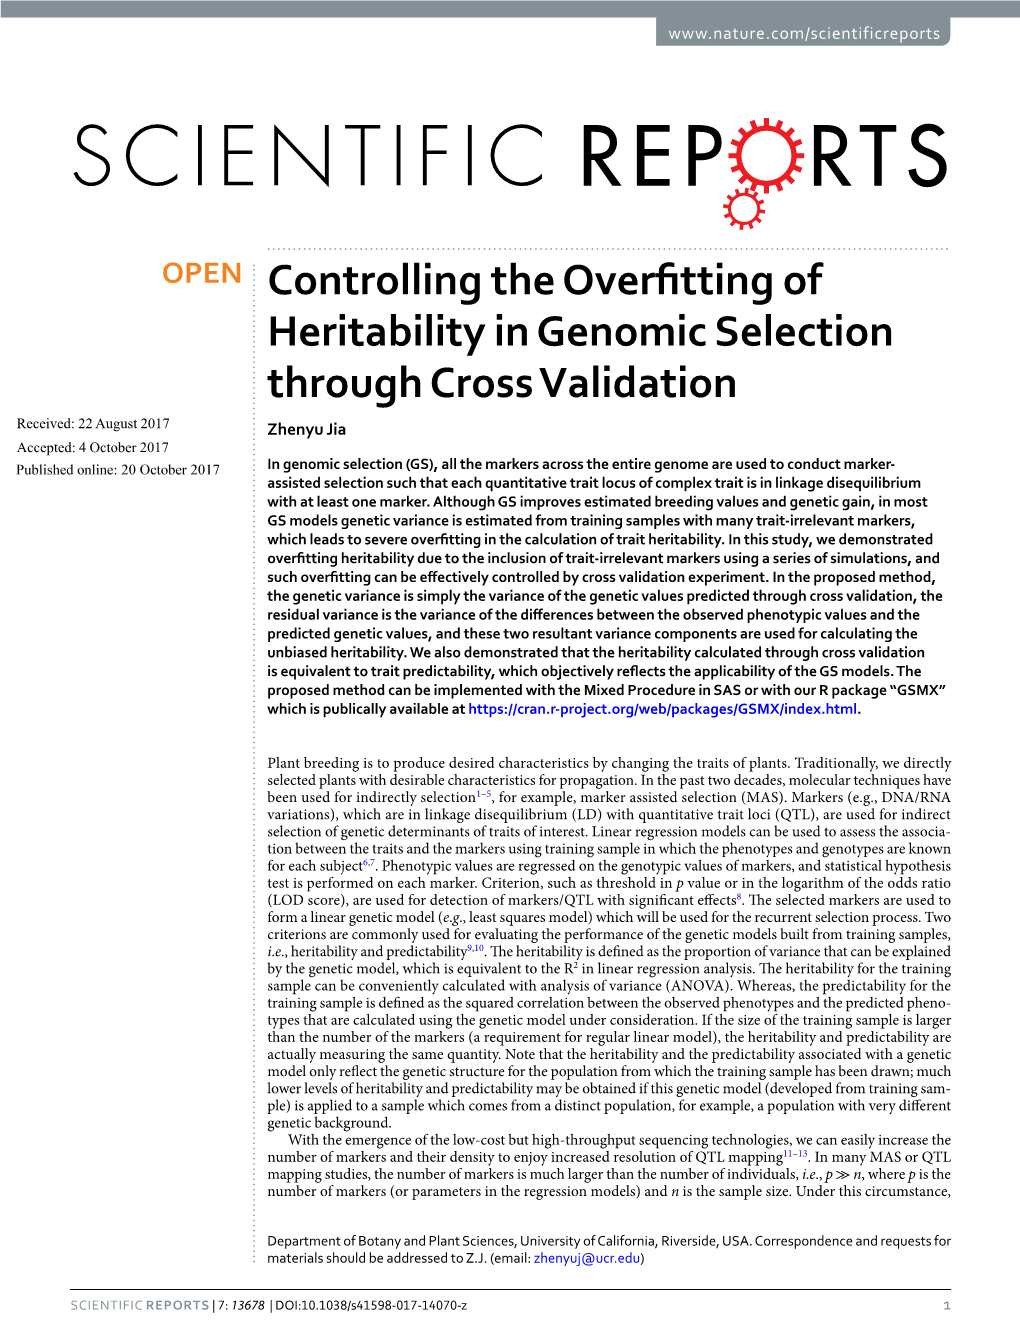 Controlling the Overfitting of Heritability in Genomic Selection